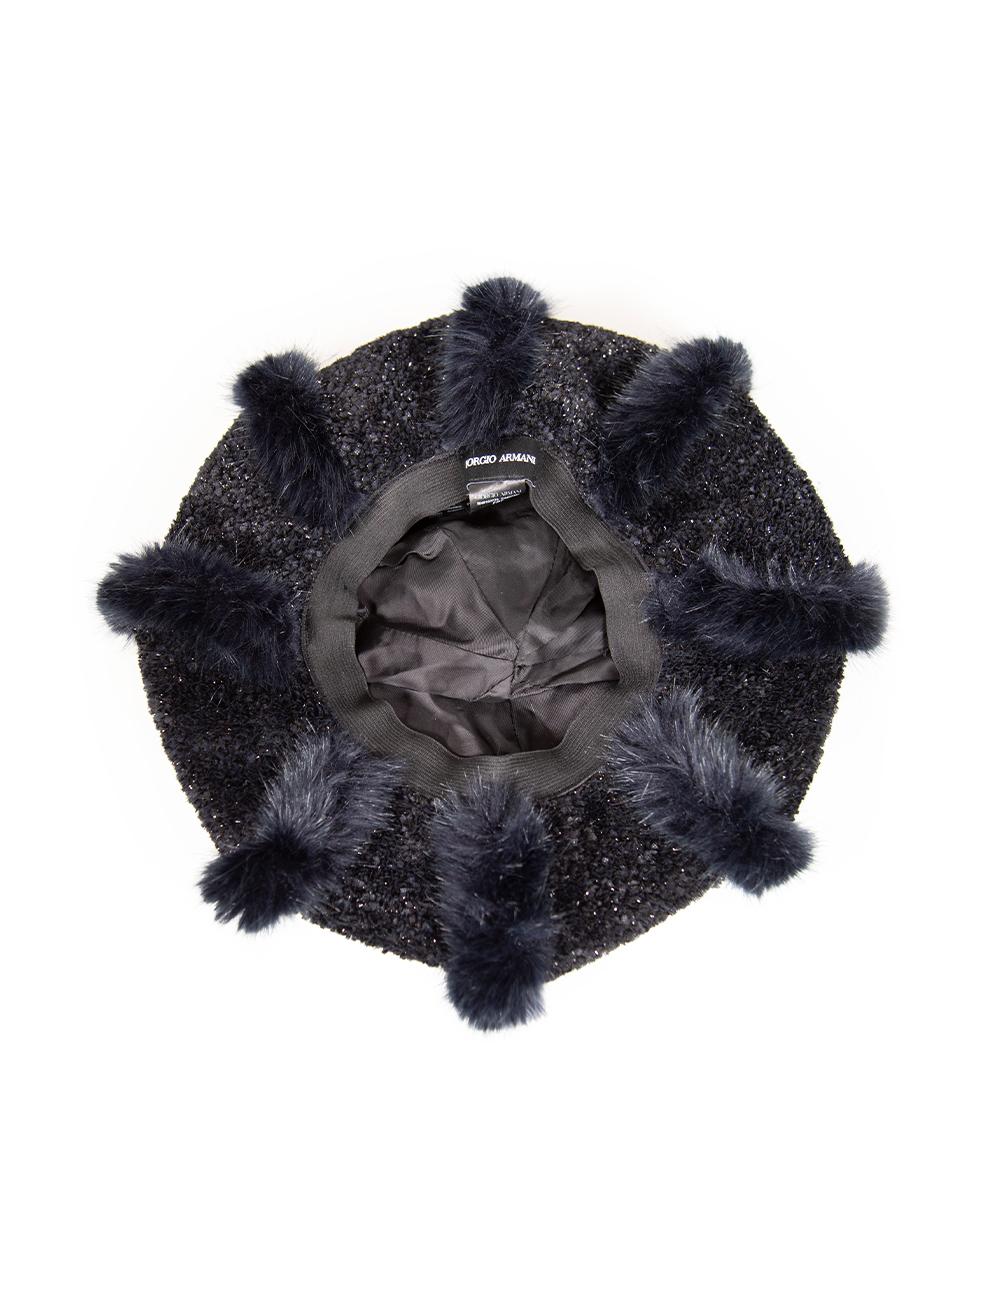 CONDITION is Very good. Hardly any visible wear to beret is evident on this used Giorgio Armani designer resale item. This item comes with an original dust bag.
 
 
 
 Details
 
 
 Black
 
 Synthetic
 
 Knit beanie
 
 Navy faux fur trim
 
 Metallic